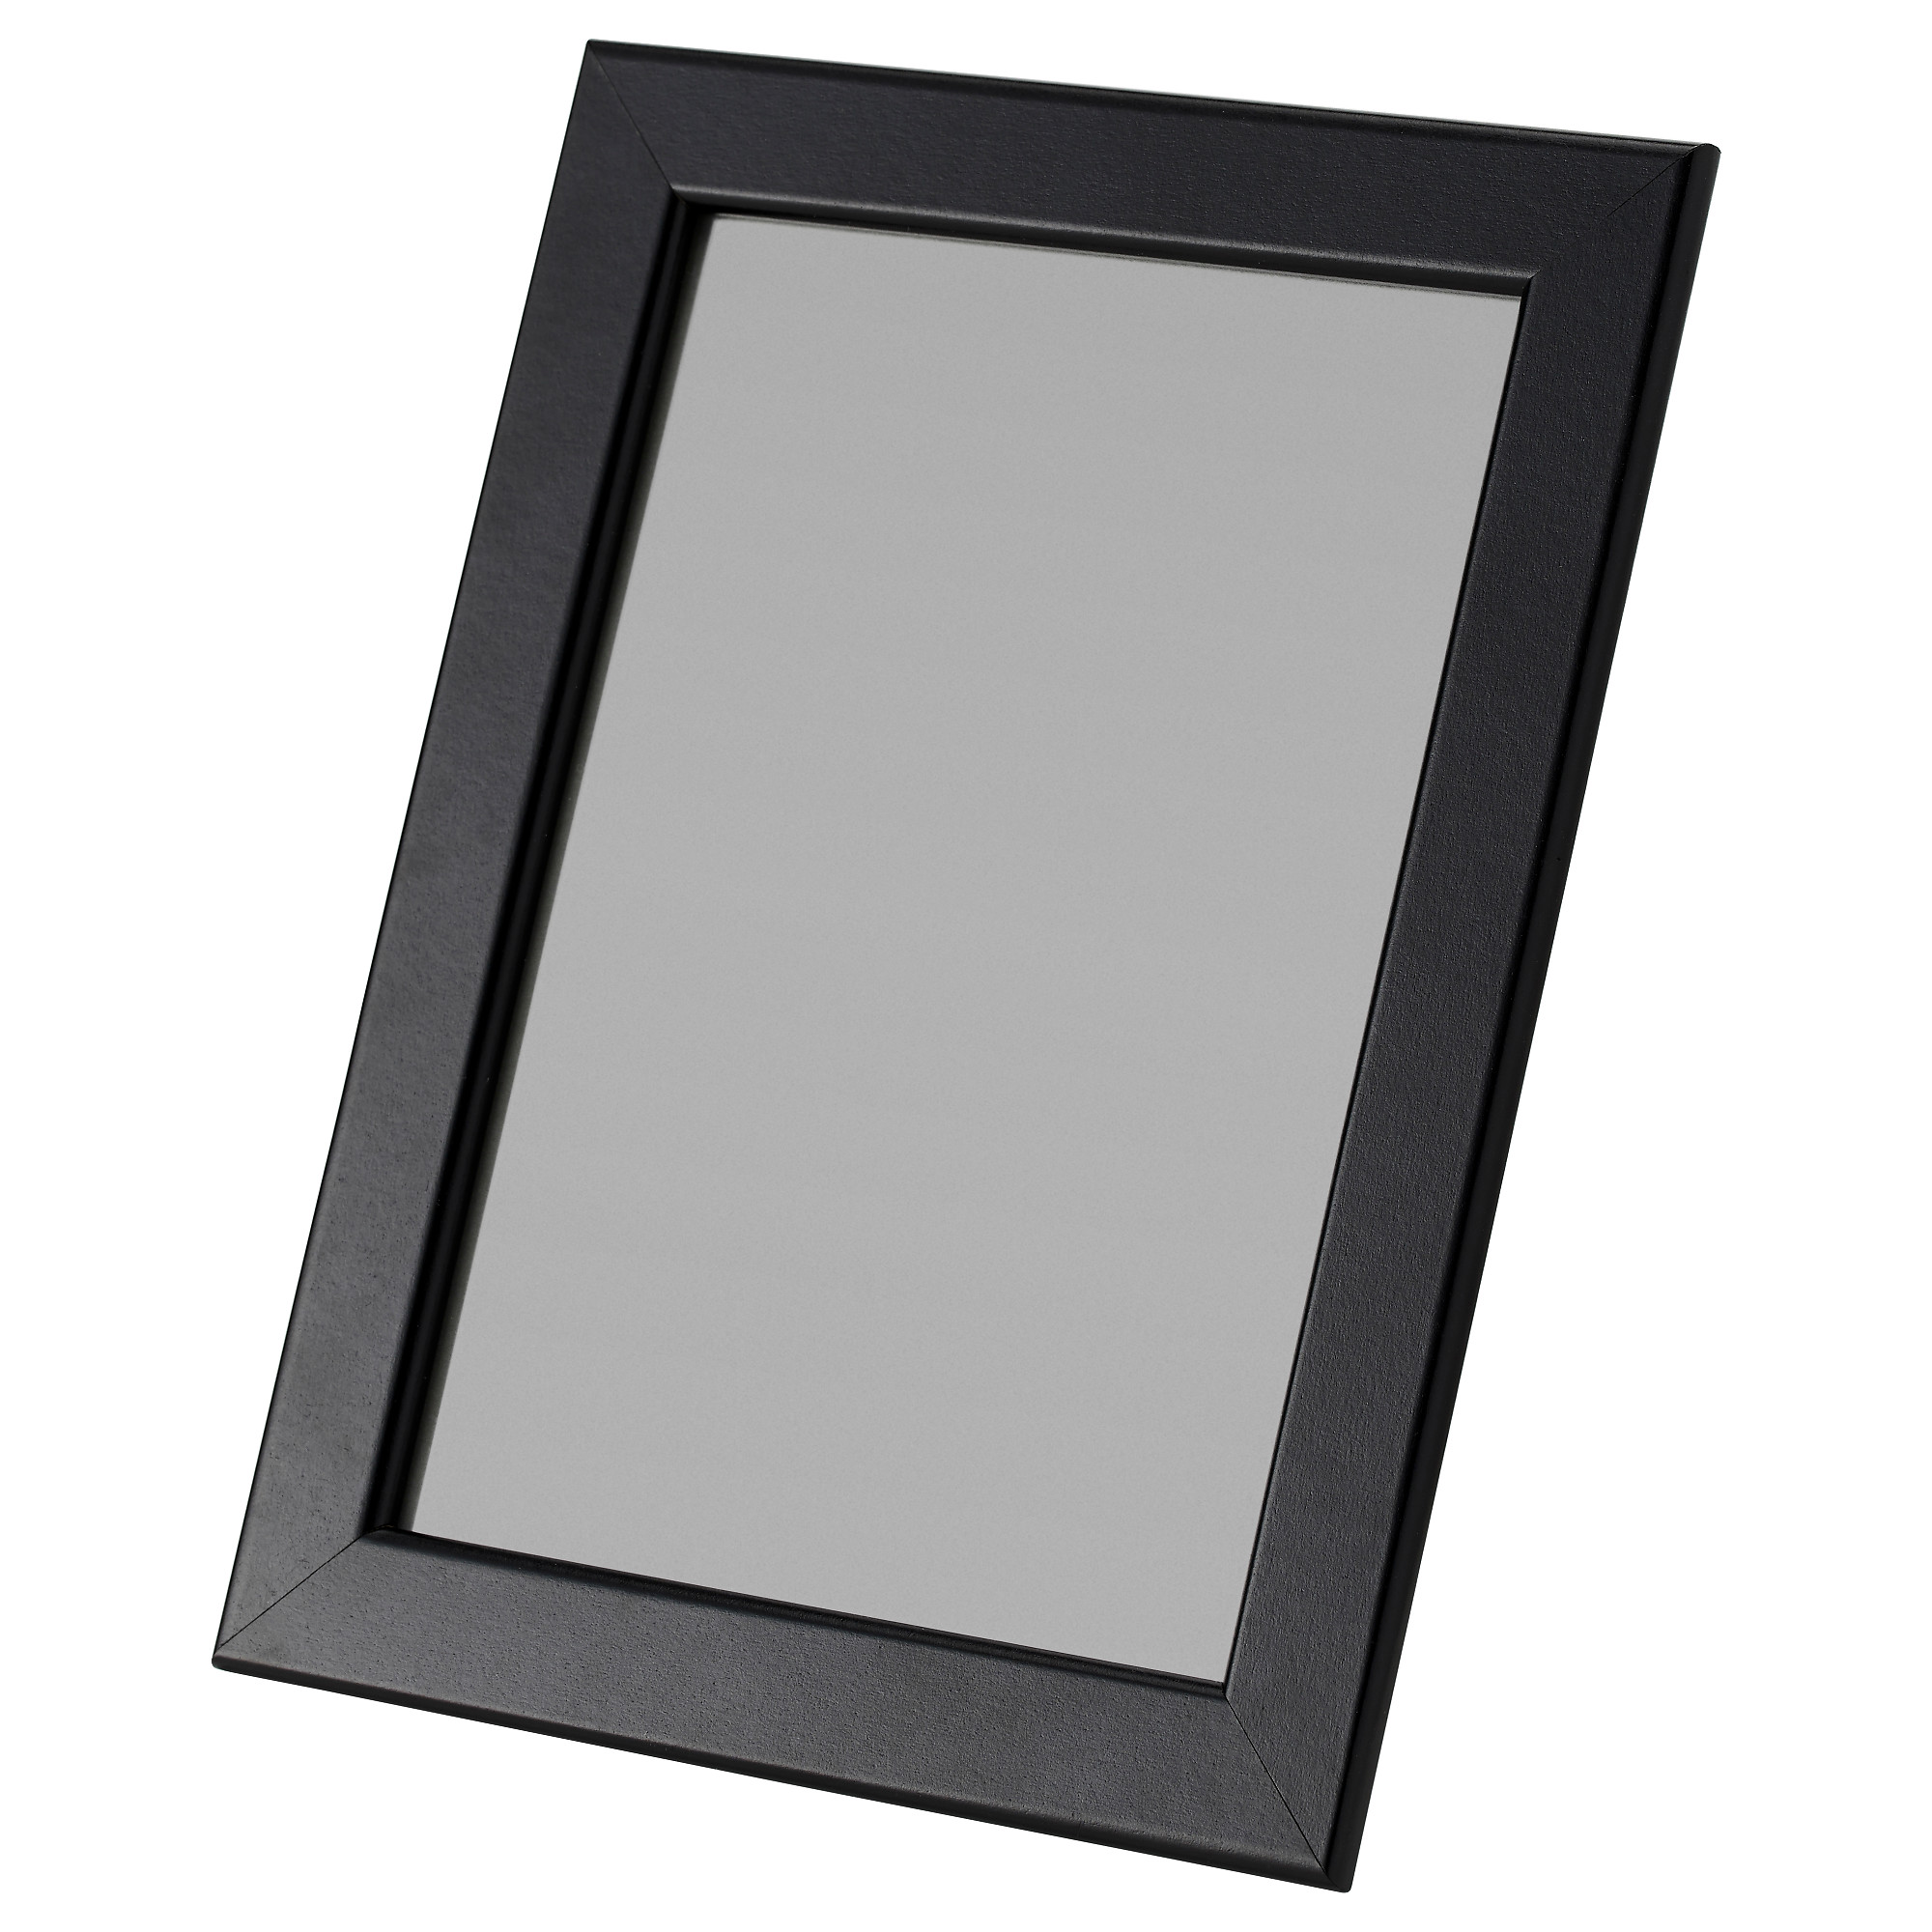 Photo frames - Frames & pictures - IKEA